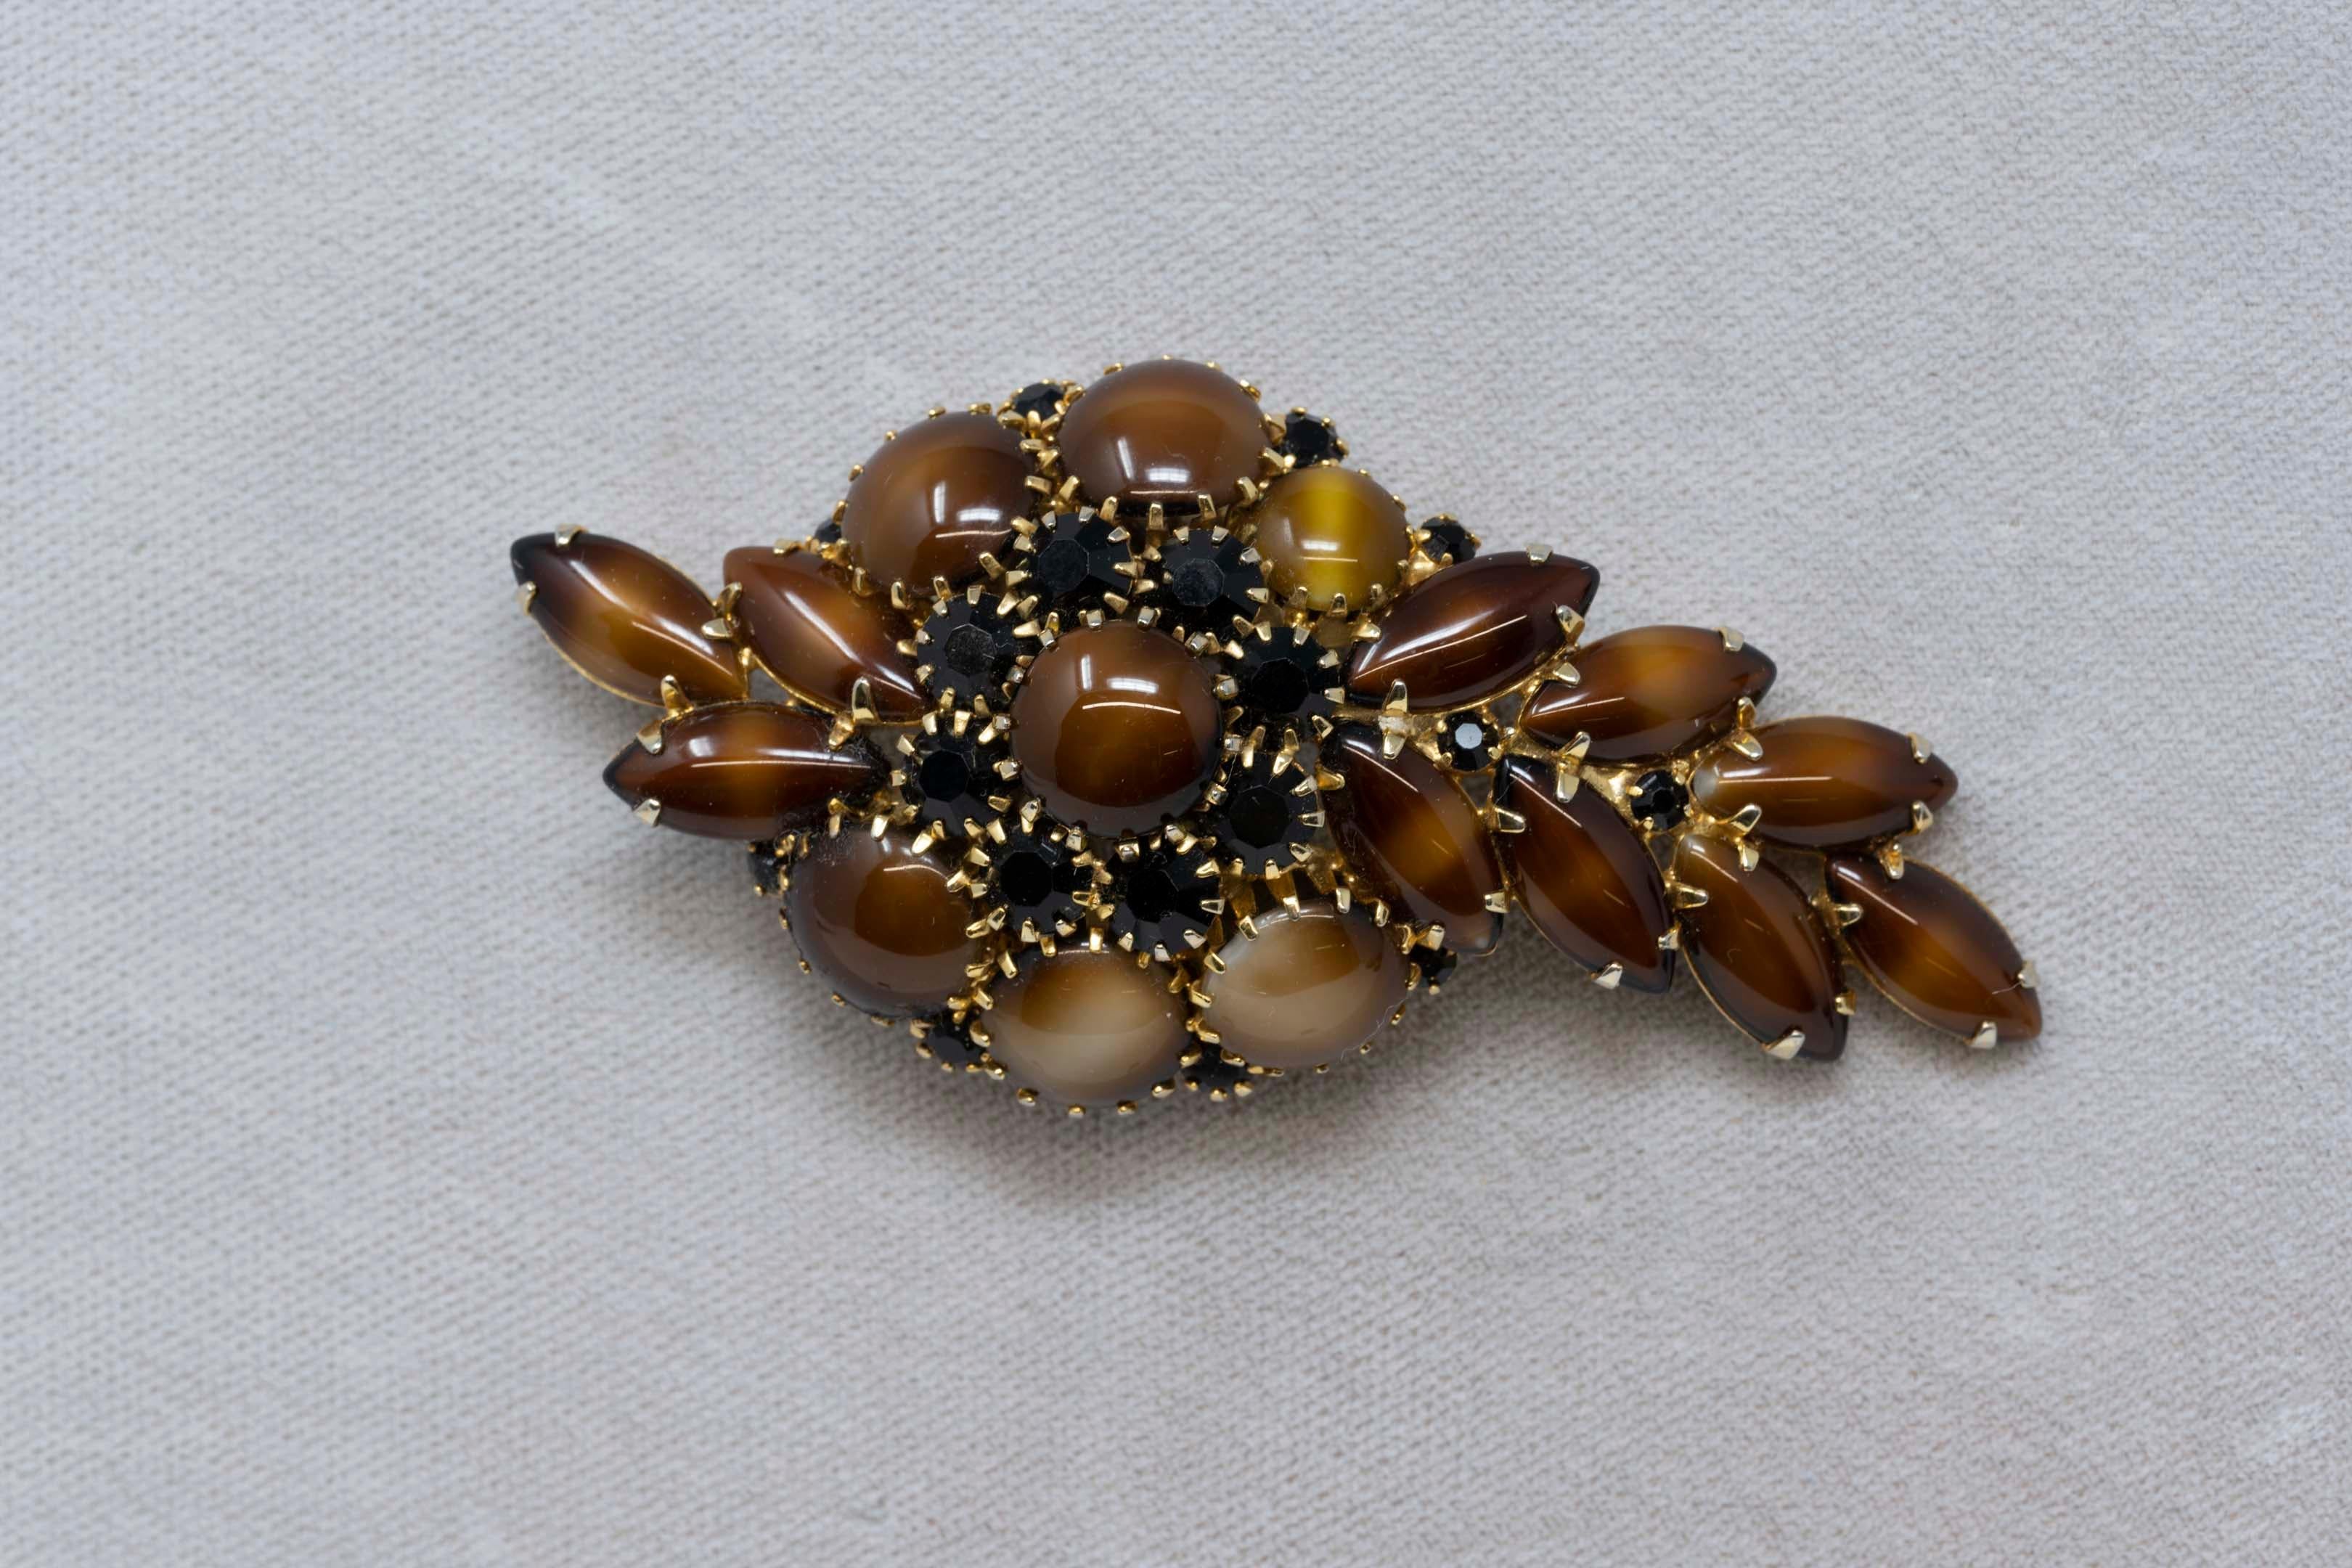 Vintage Hobe 1965 signed gold toned brooch with brown marble cabochon and black rhinestone. Measures 3 1/4 inches long x 1 1/2 inches wide. In good condition.
